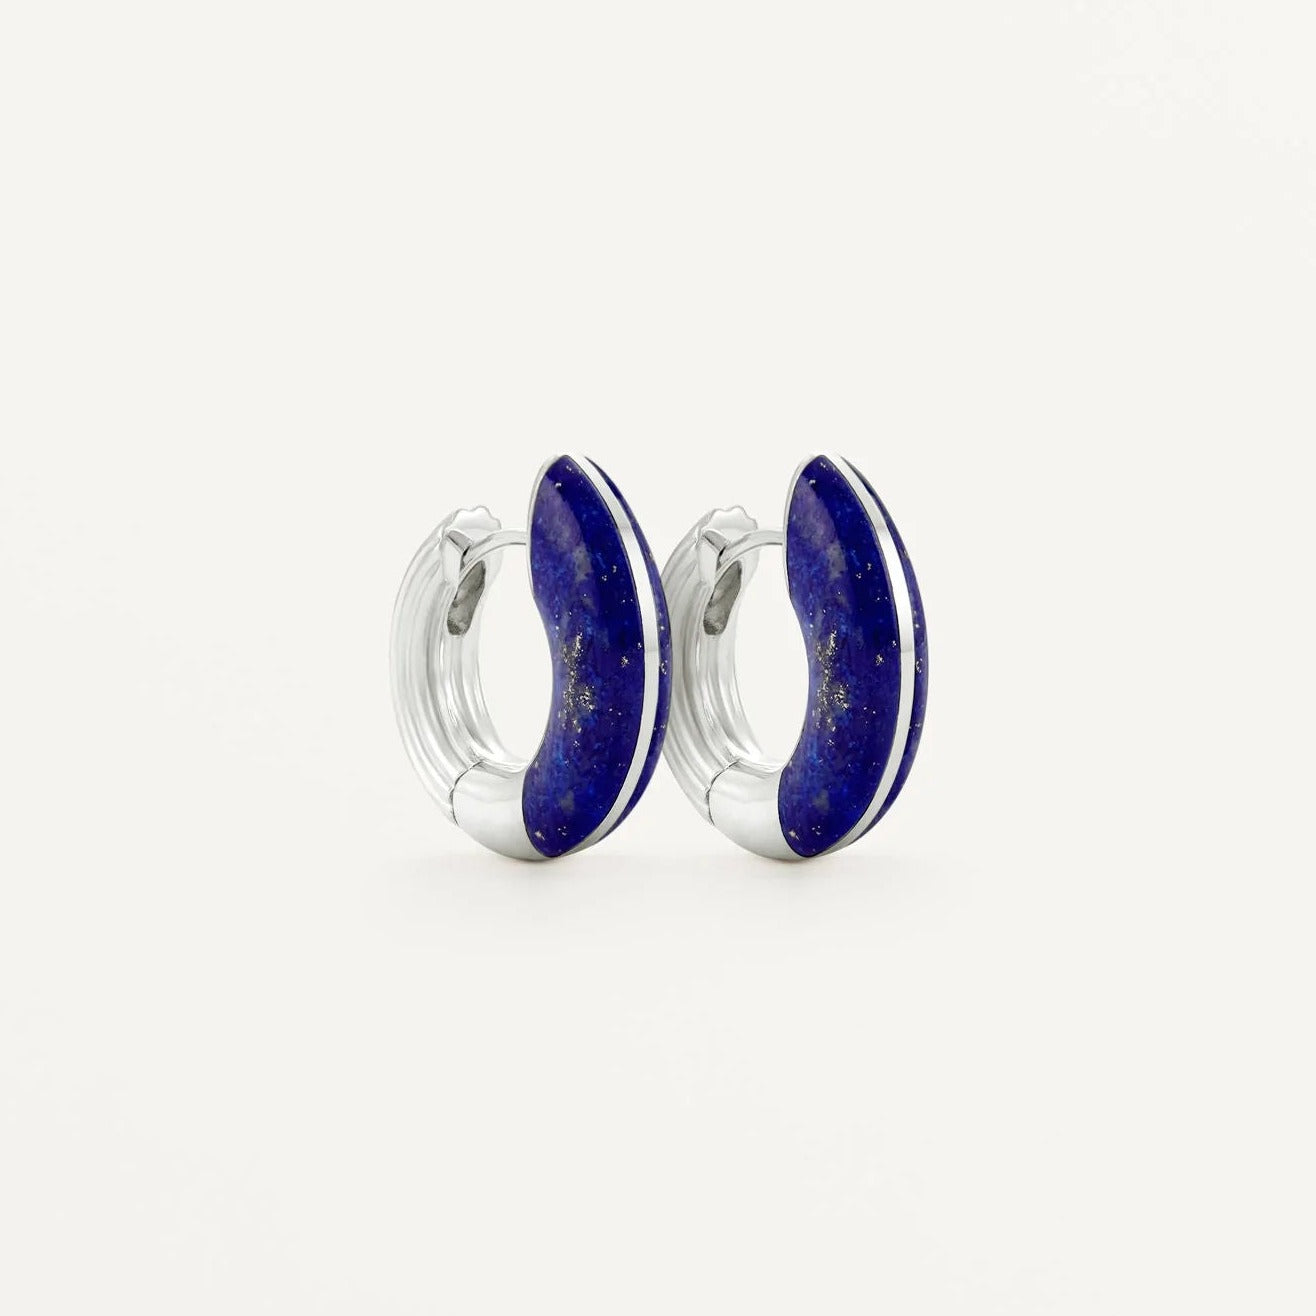 Locus Solus Hoops – Lapis Lazuli & Sterling Silver - Boutee